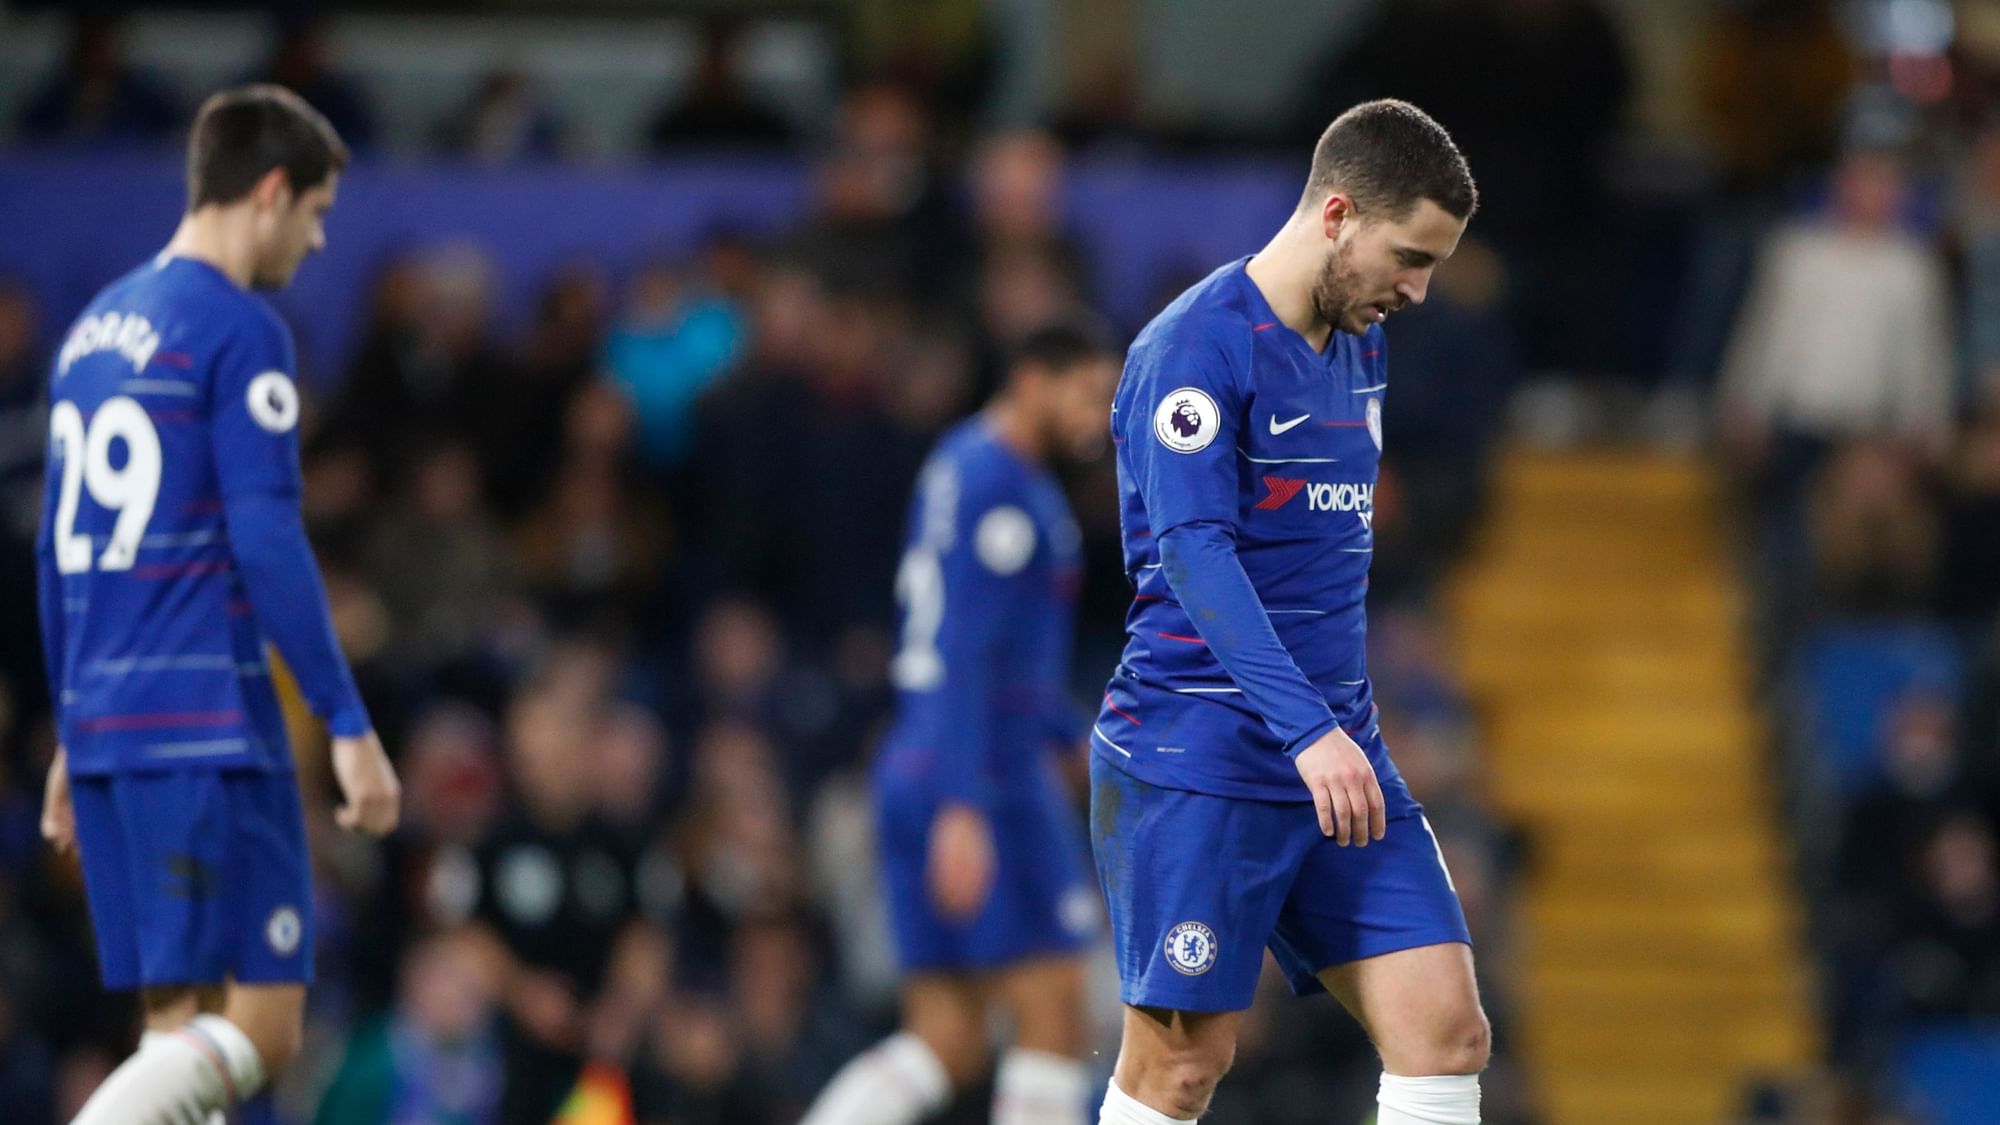 Chelsea’s Eden Hazard (right) walk at the end of a English Premier League soccer match between Chelsea and Southampton at Stamford Bridge.